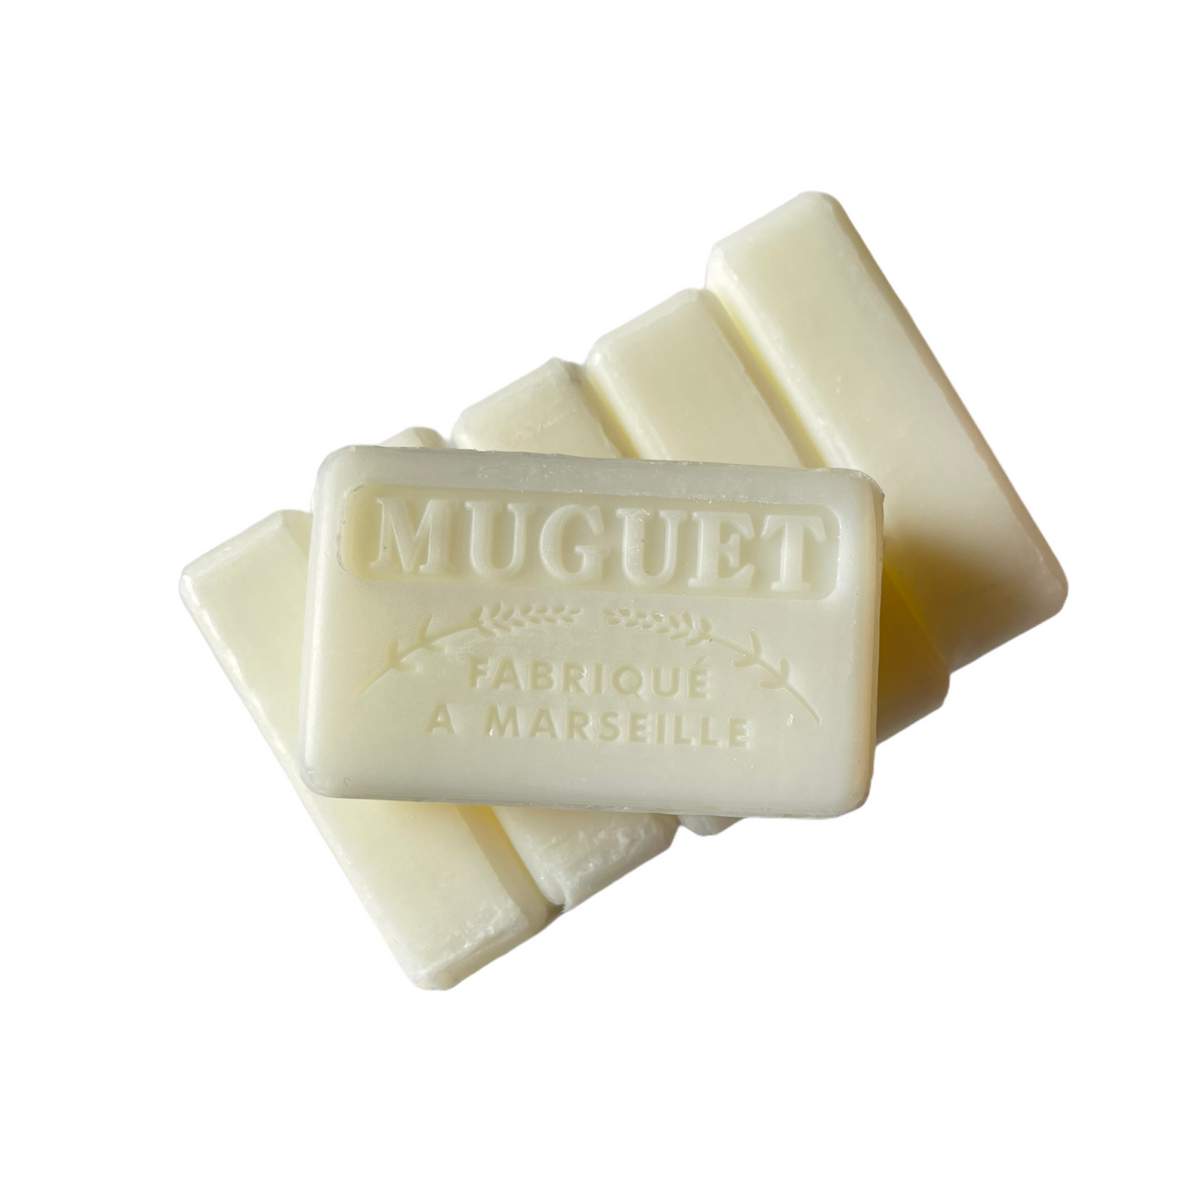 Muguet / Lily of the Valley French Soap Bar 125g